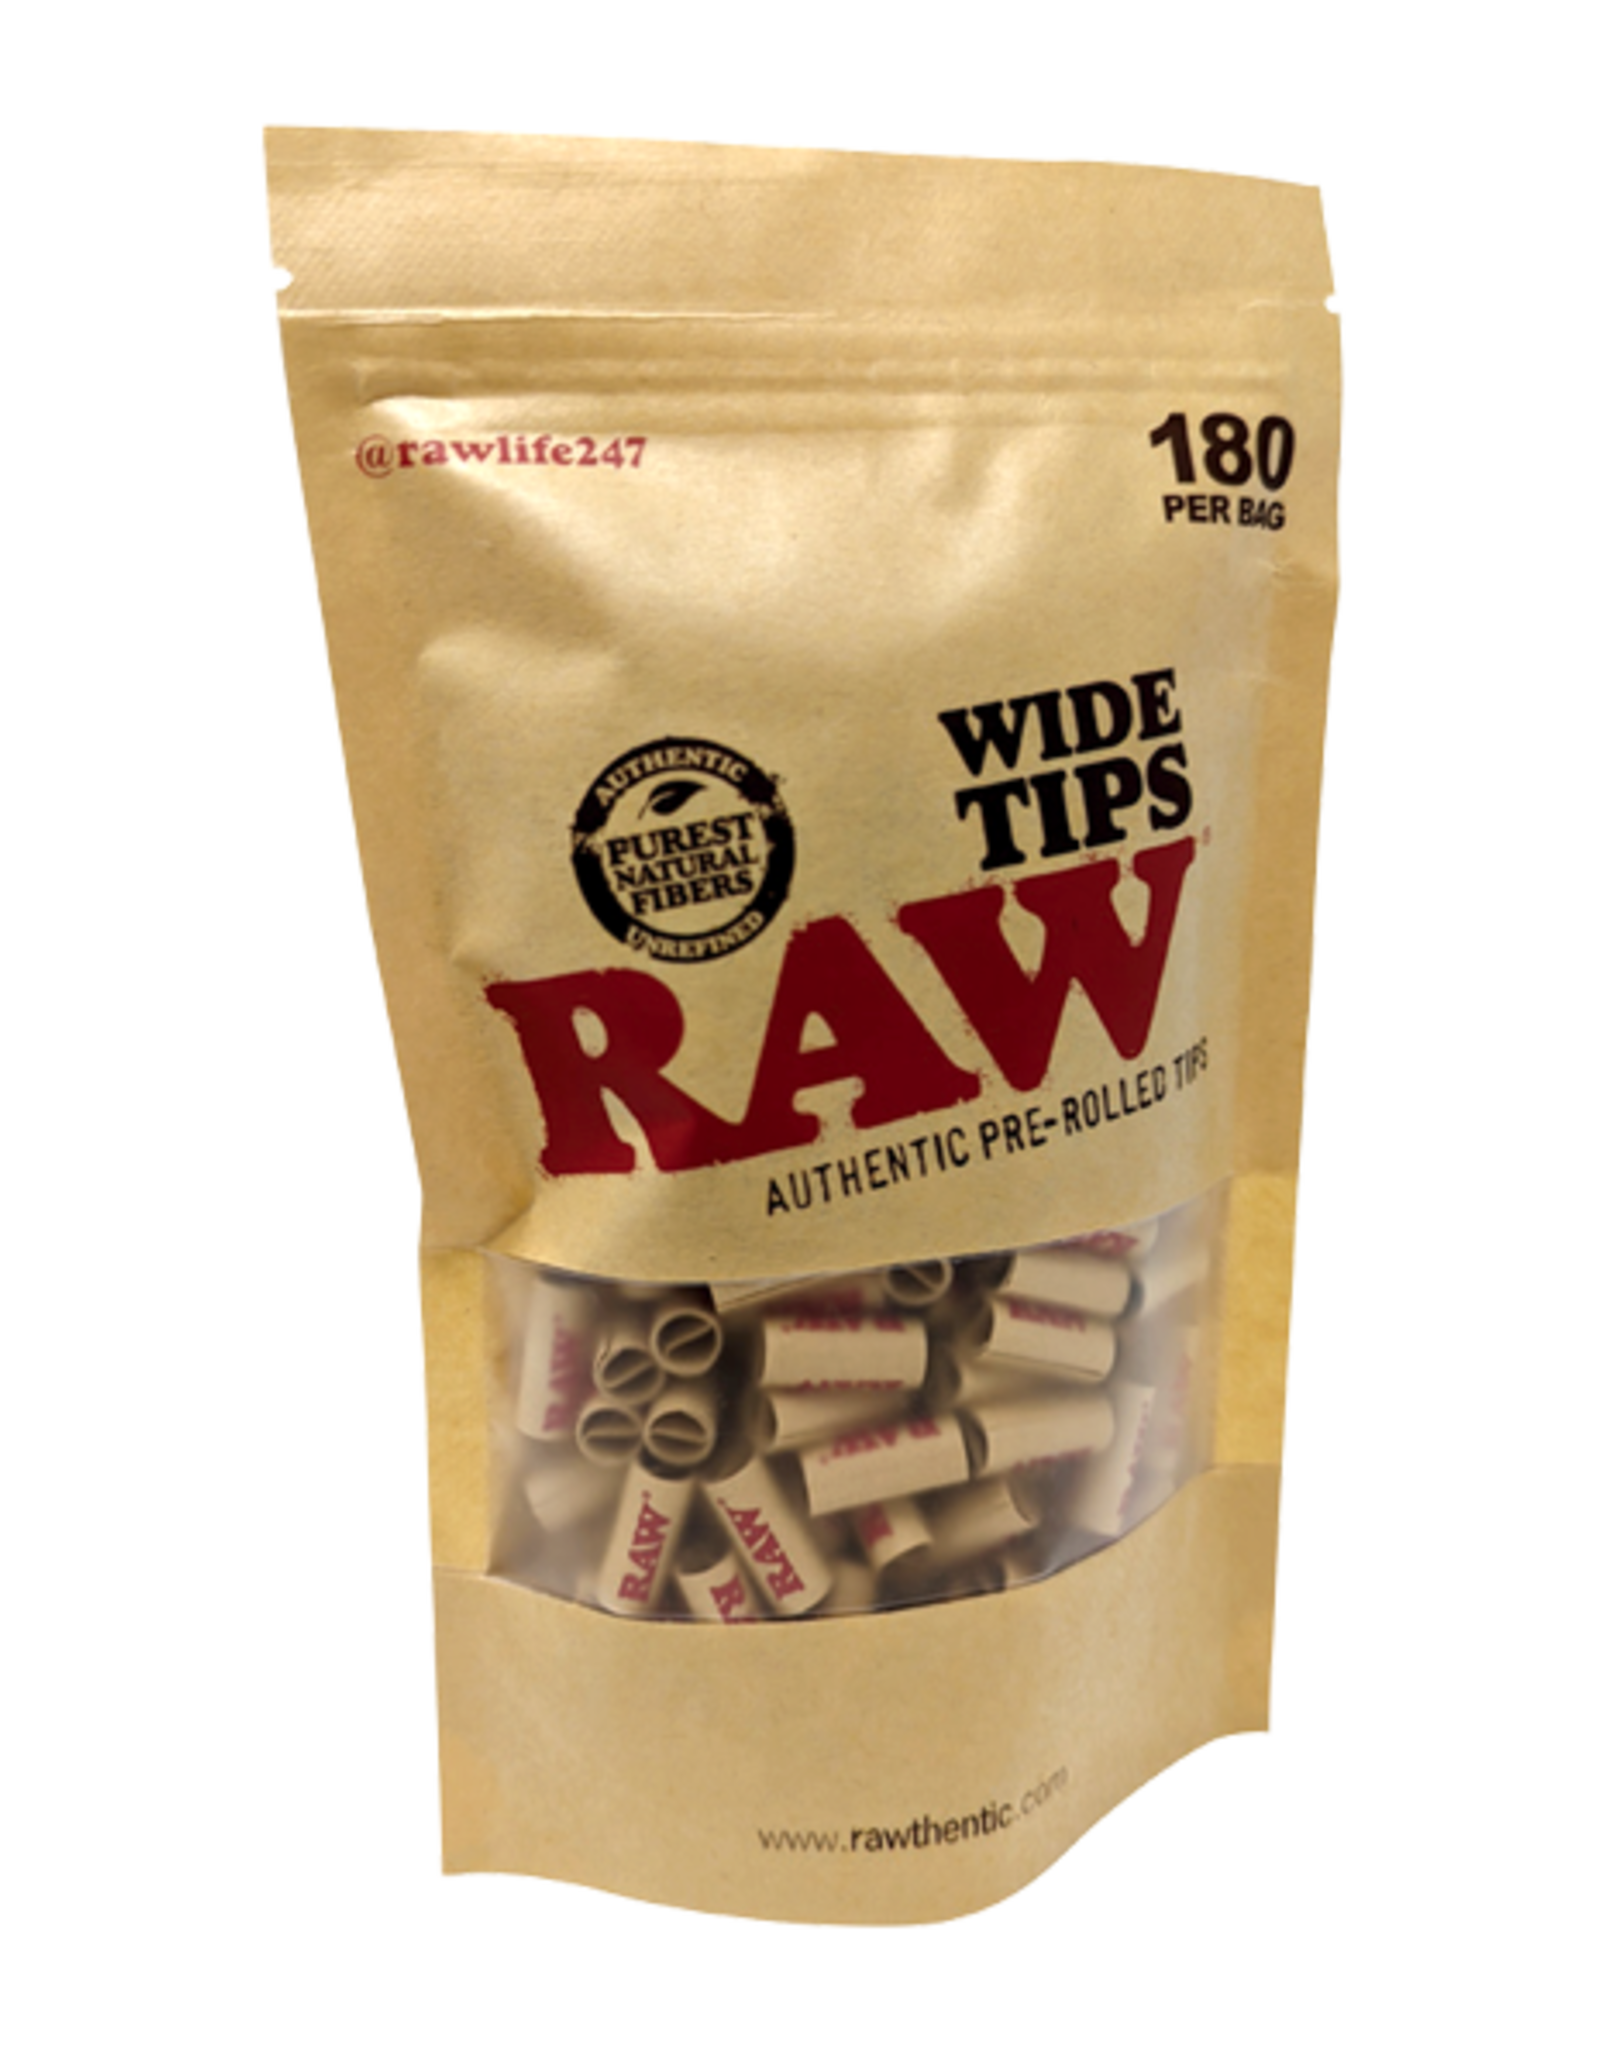 RAW Classic Pre-Rolled Wide Tips - 180pk